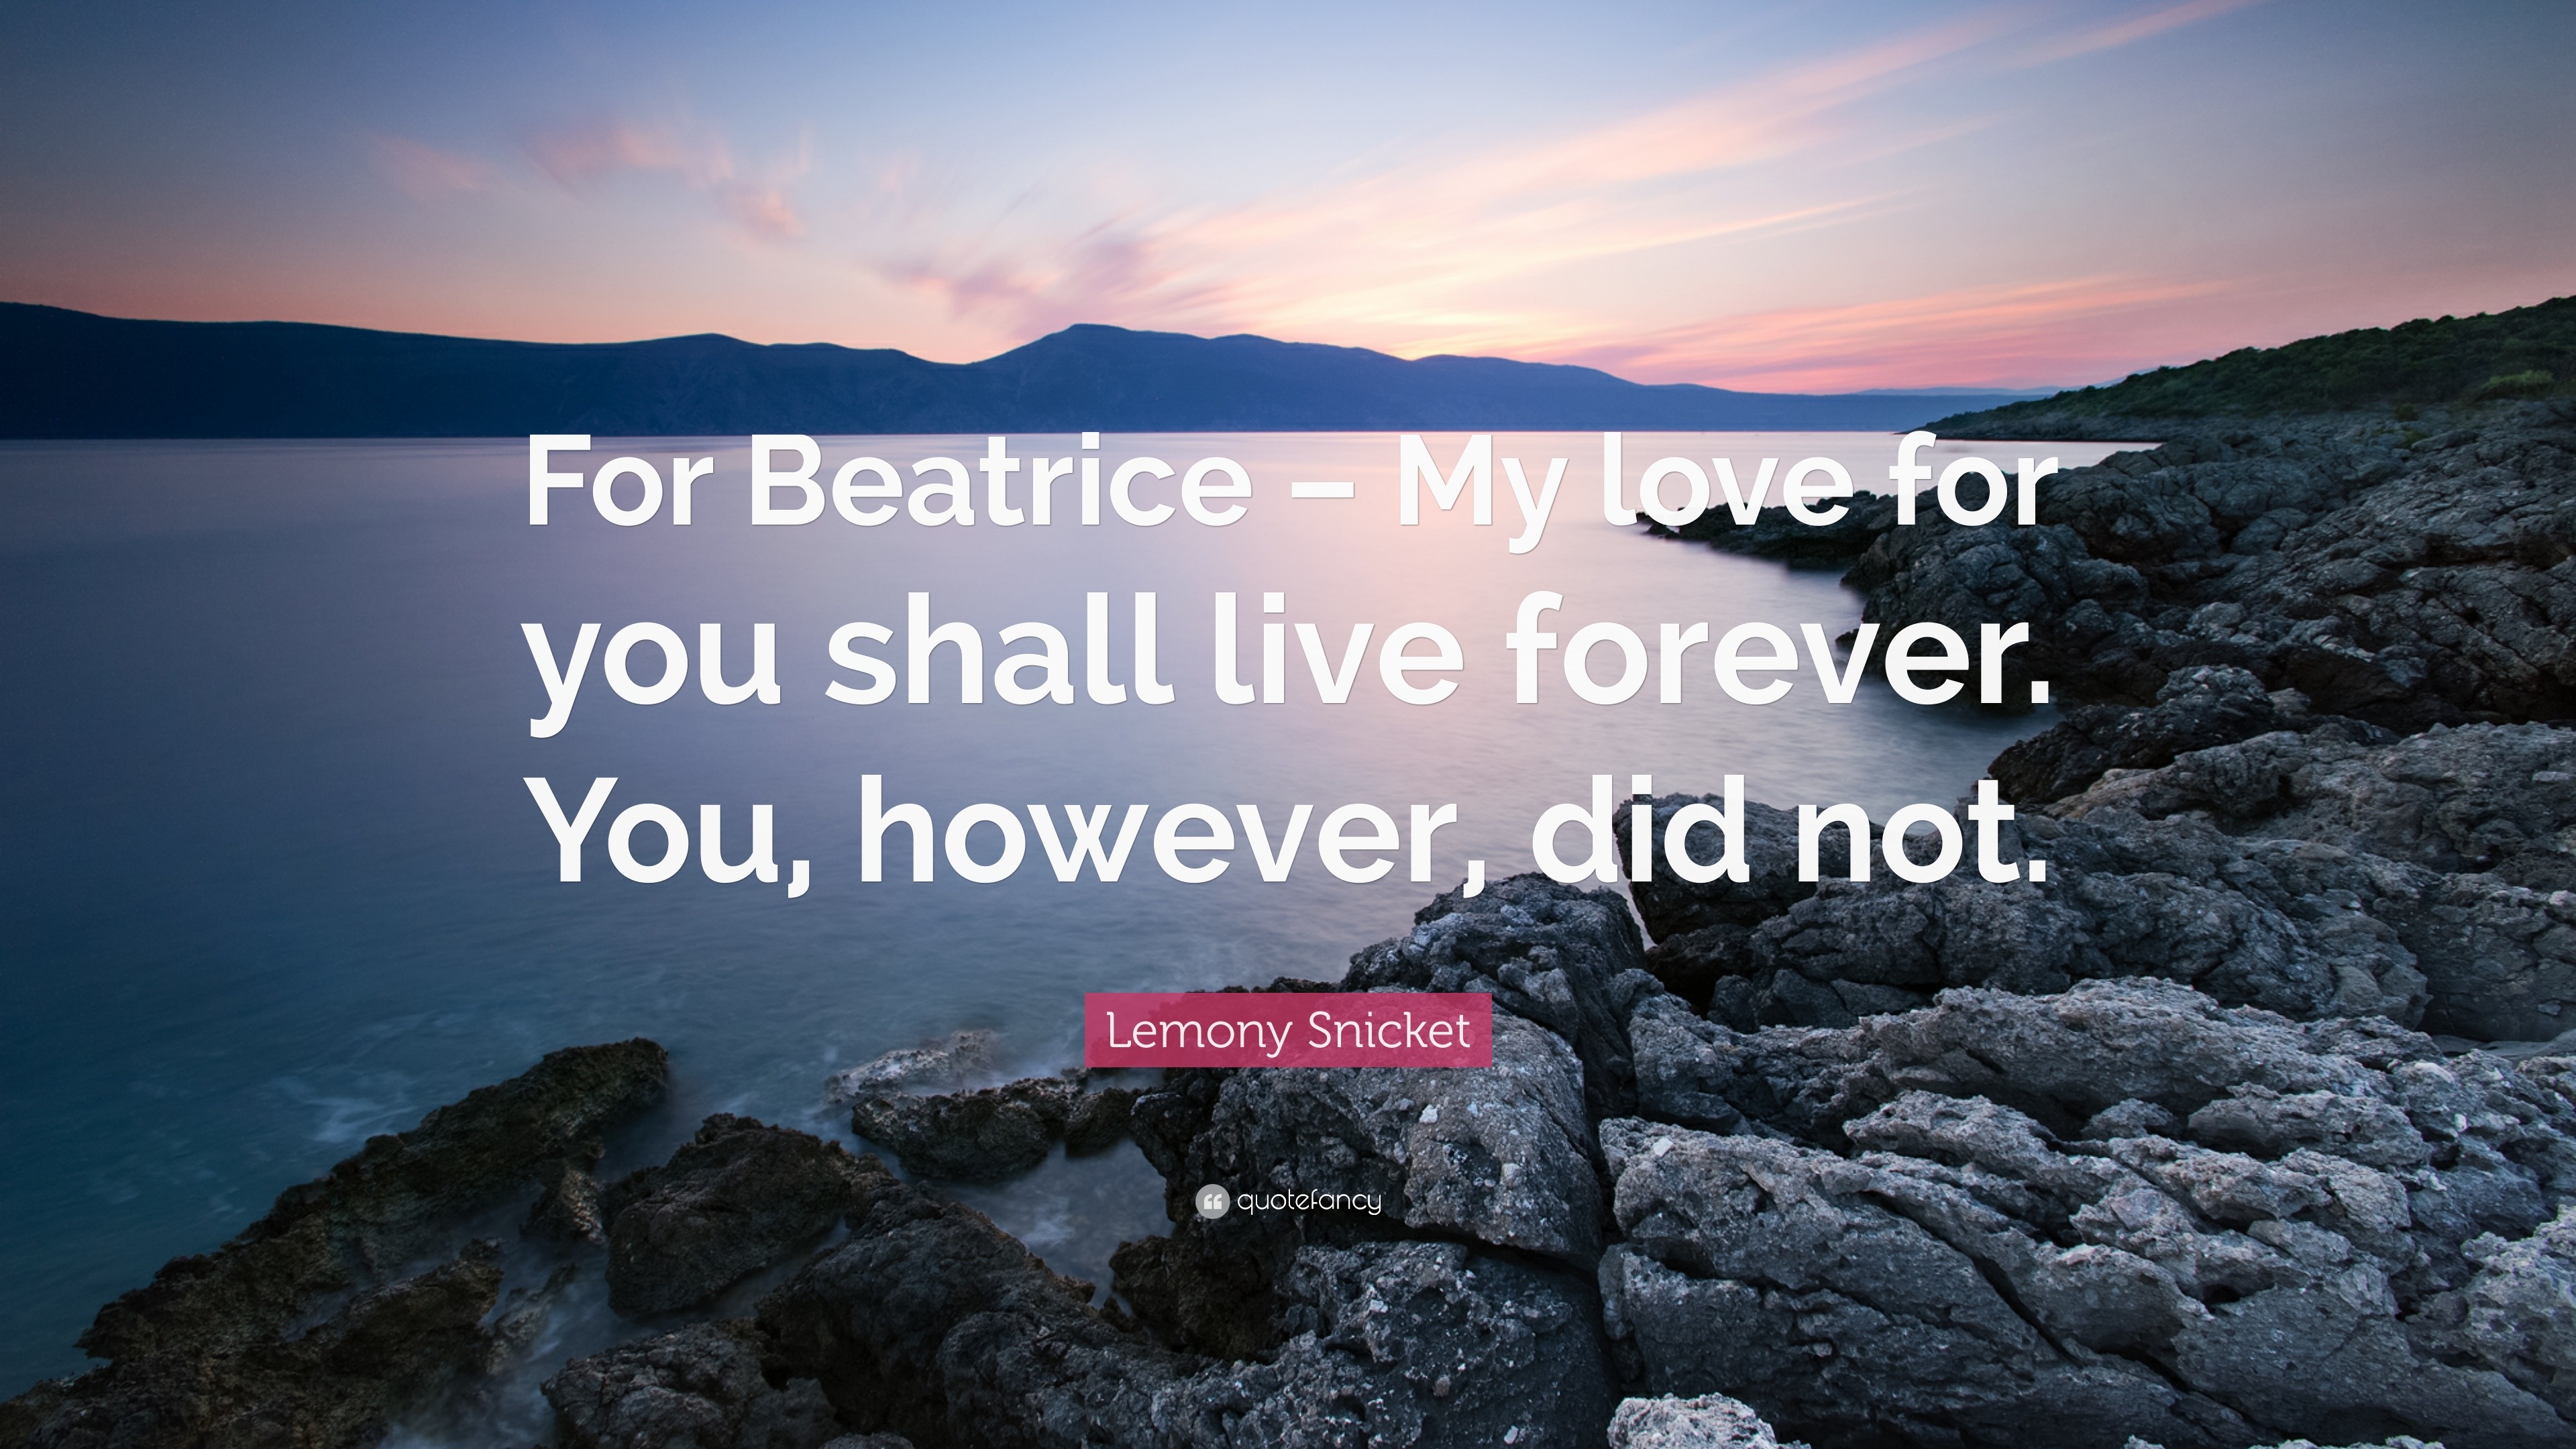 Lemony Snicket Quote “For Beatrice – My love for you shall live forever